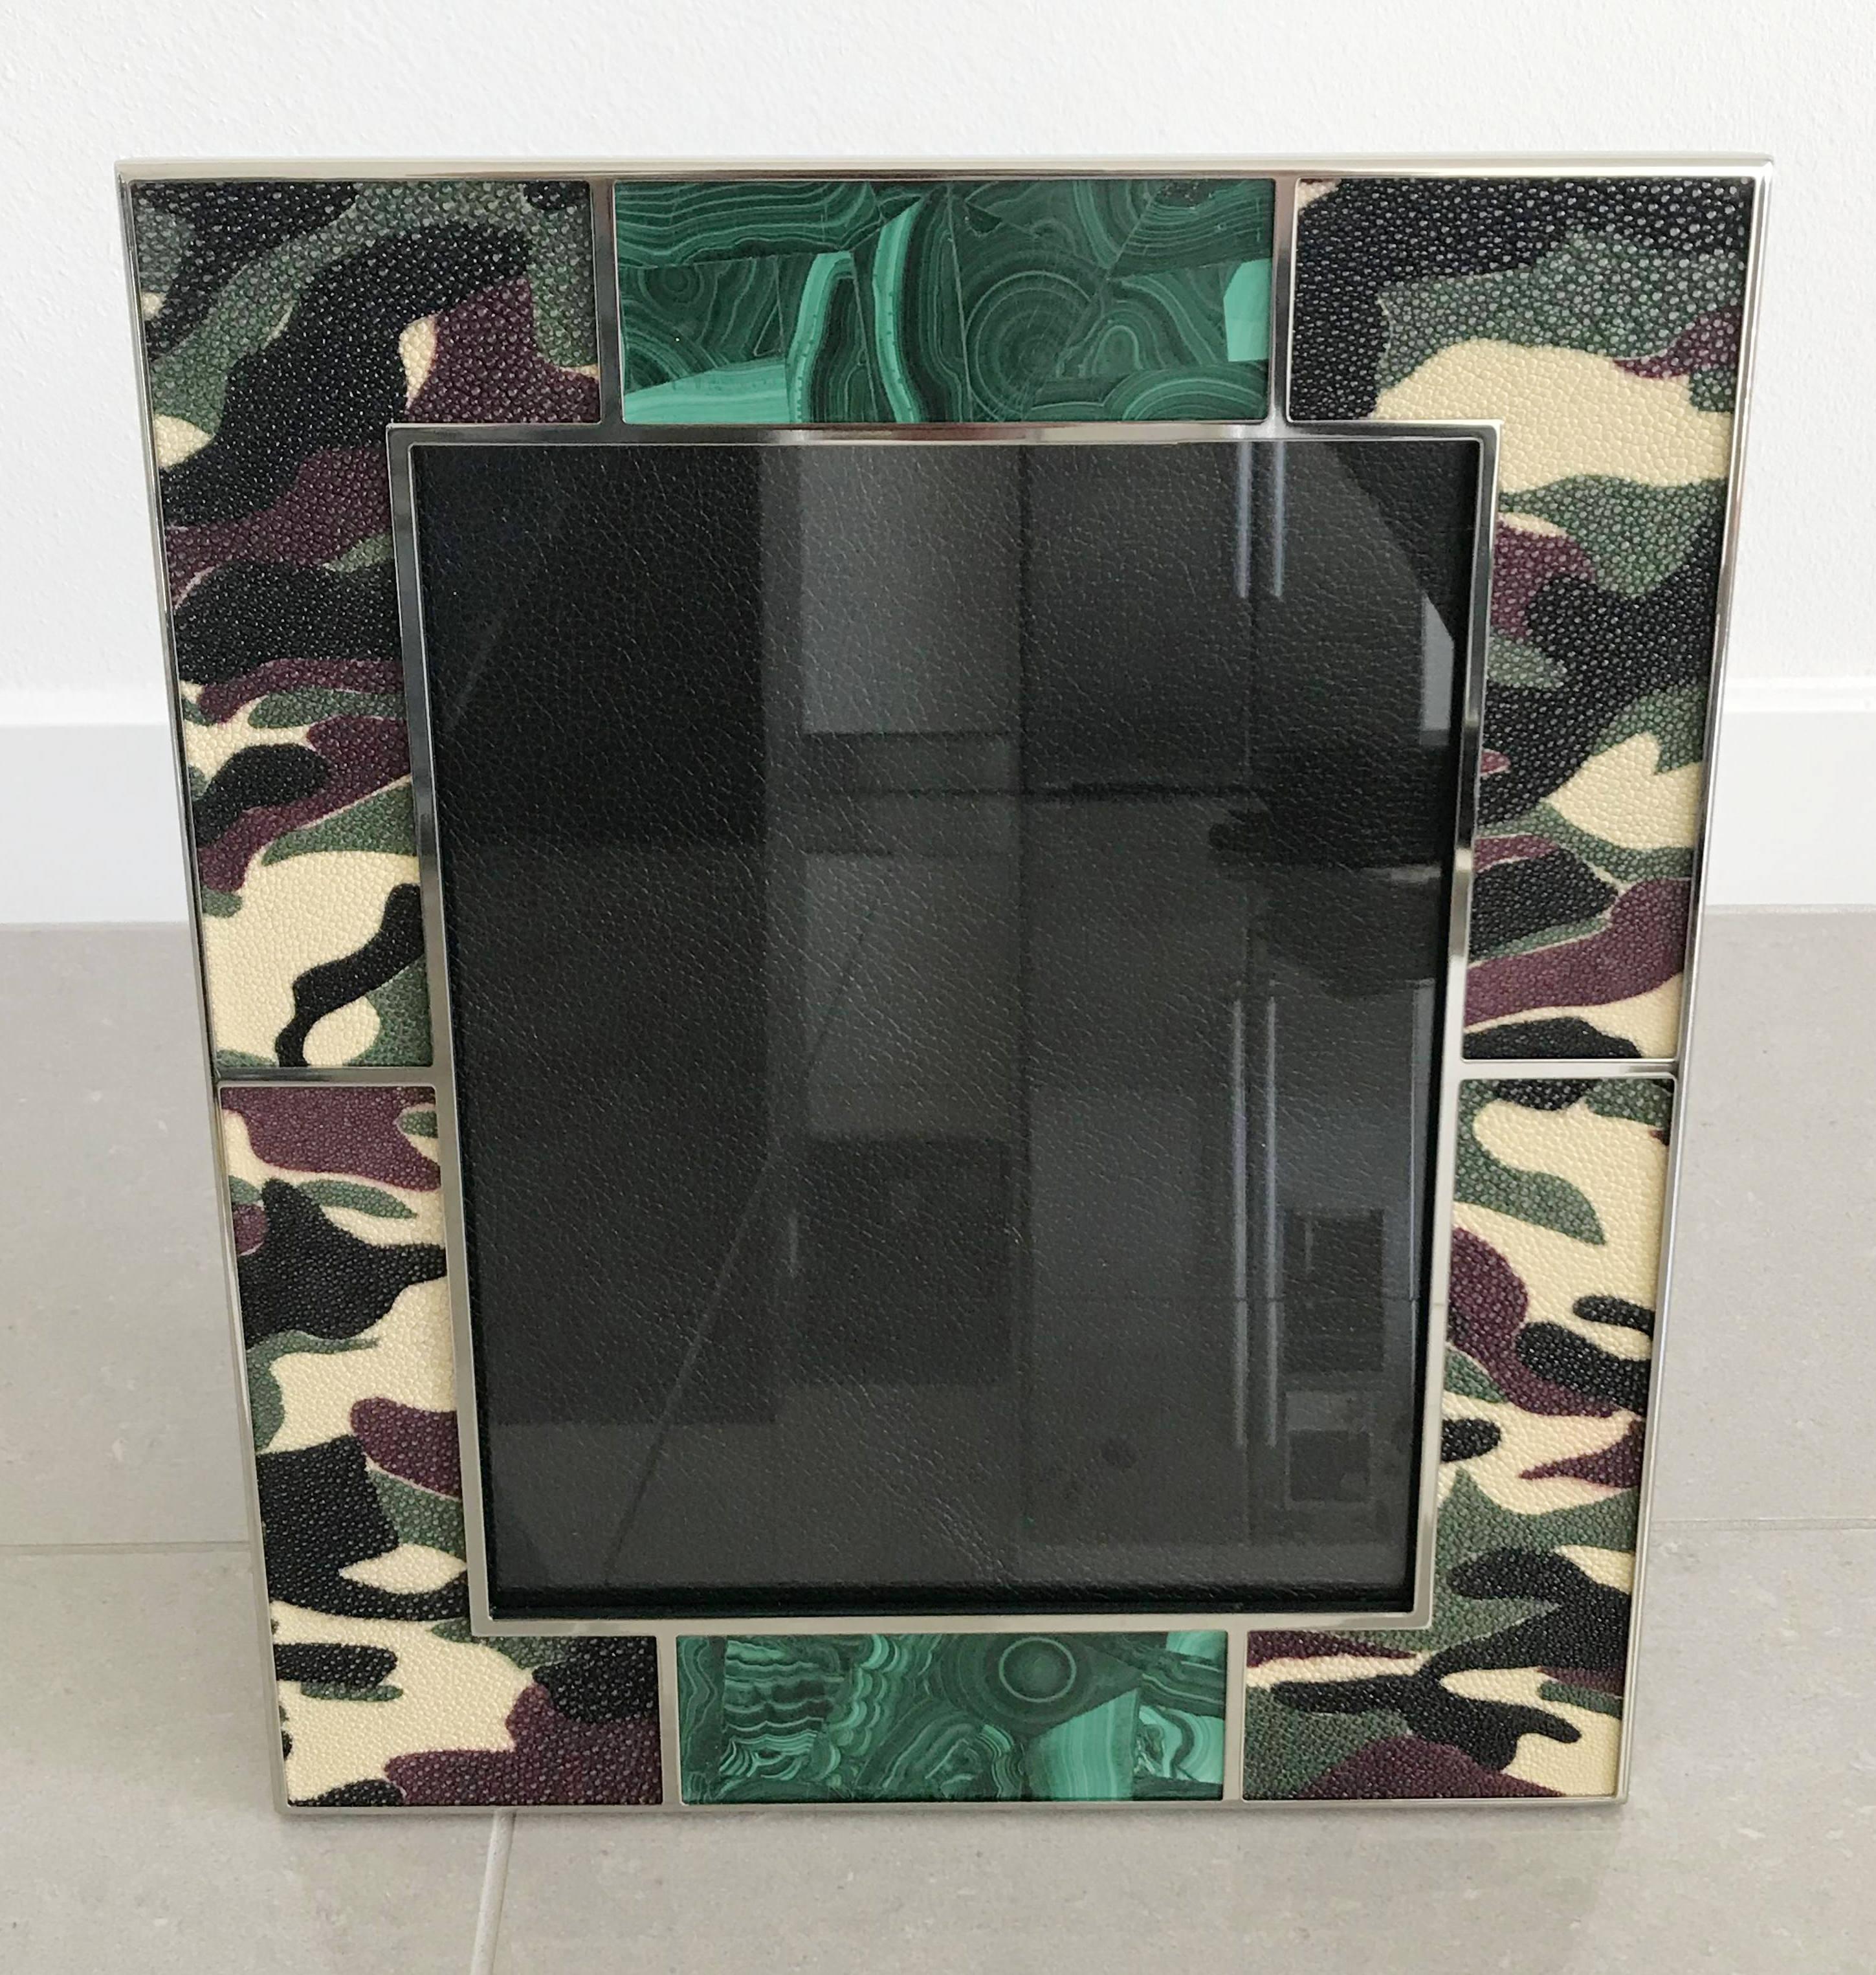 Camoflauge colored shagreen leather with malachite inserts and nickel-plated picture frame by Fabio Ltd
Measures: Height 13.5 inches, width 11.5 inches, depth 1 inch
Photo size: 8 inches by 10 inches
1 available in stock in Palm Springs currently ON